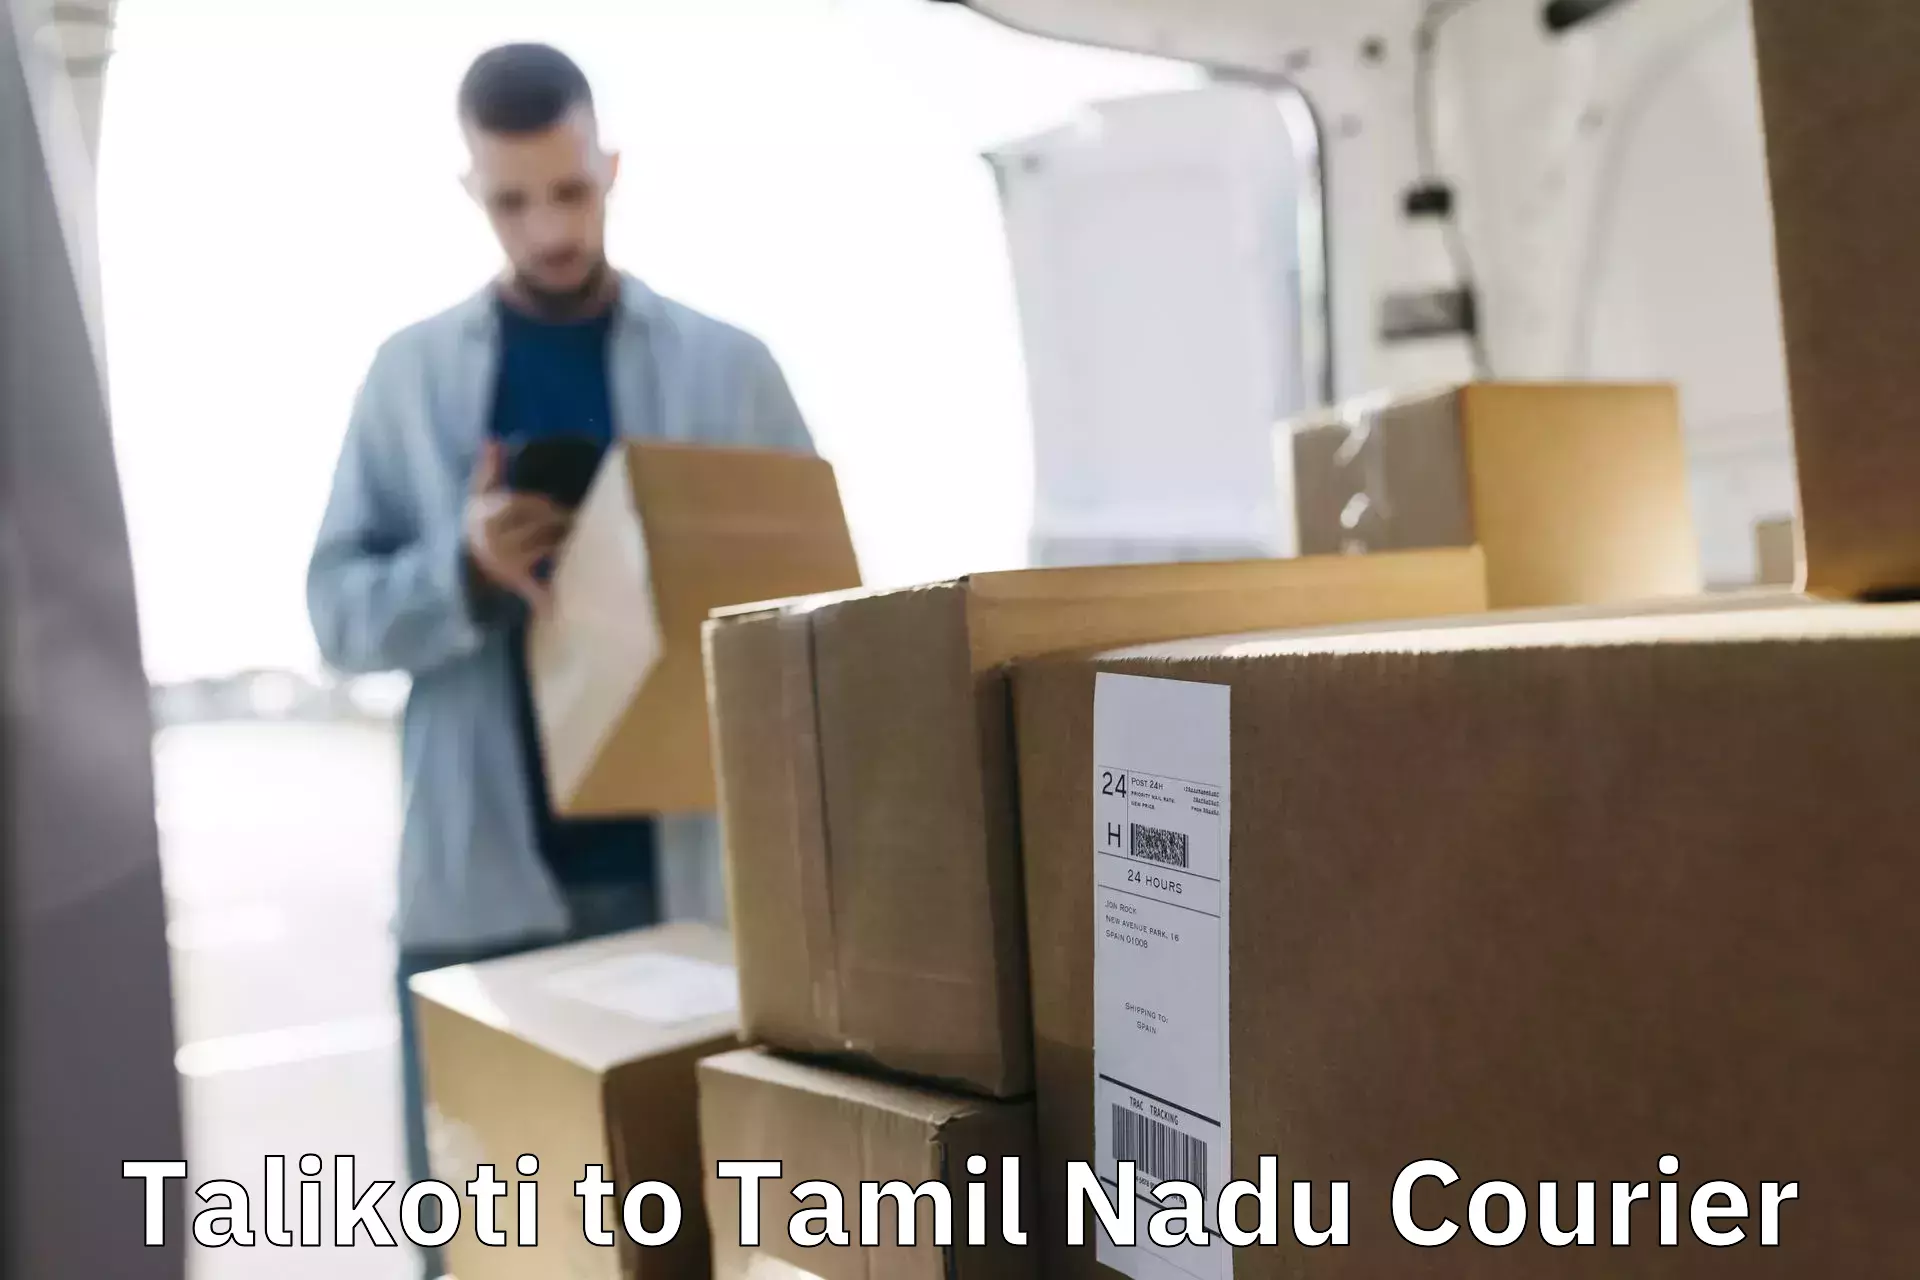 On-call courier service Talikoti to Ennore Port Chennai